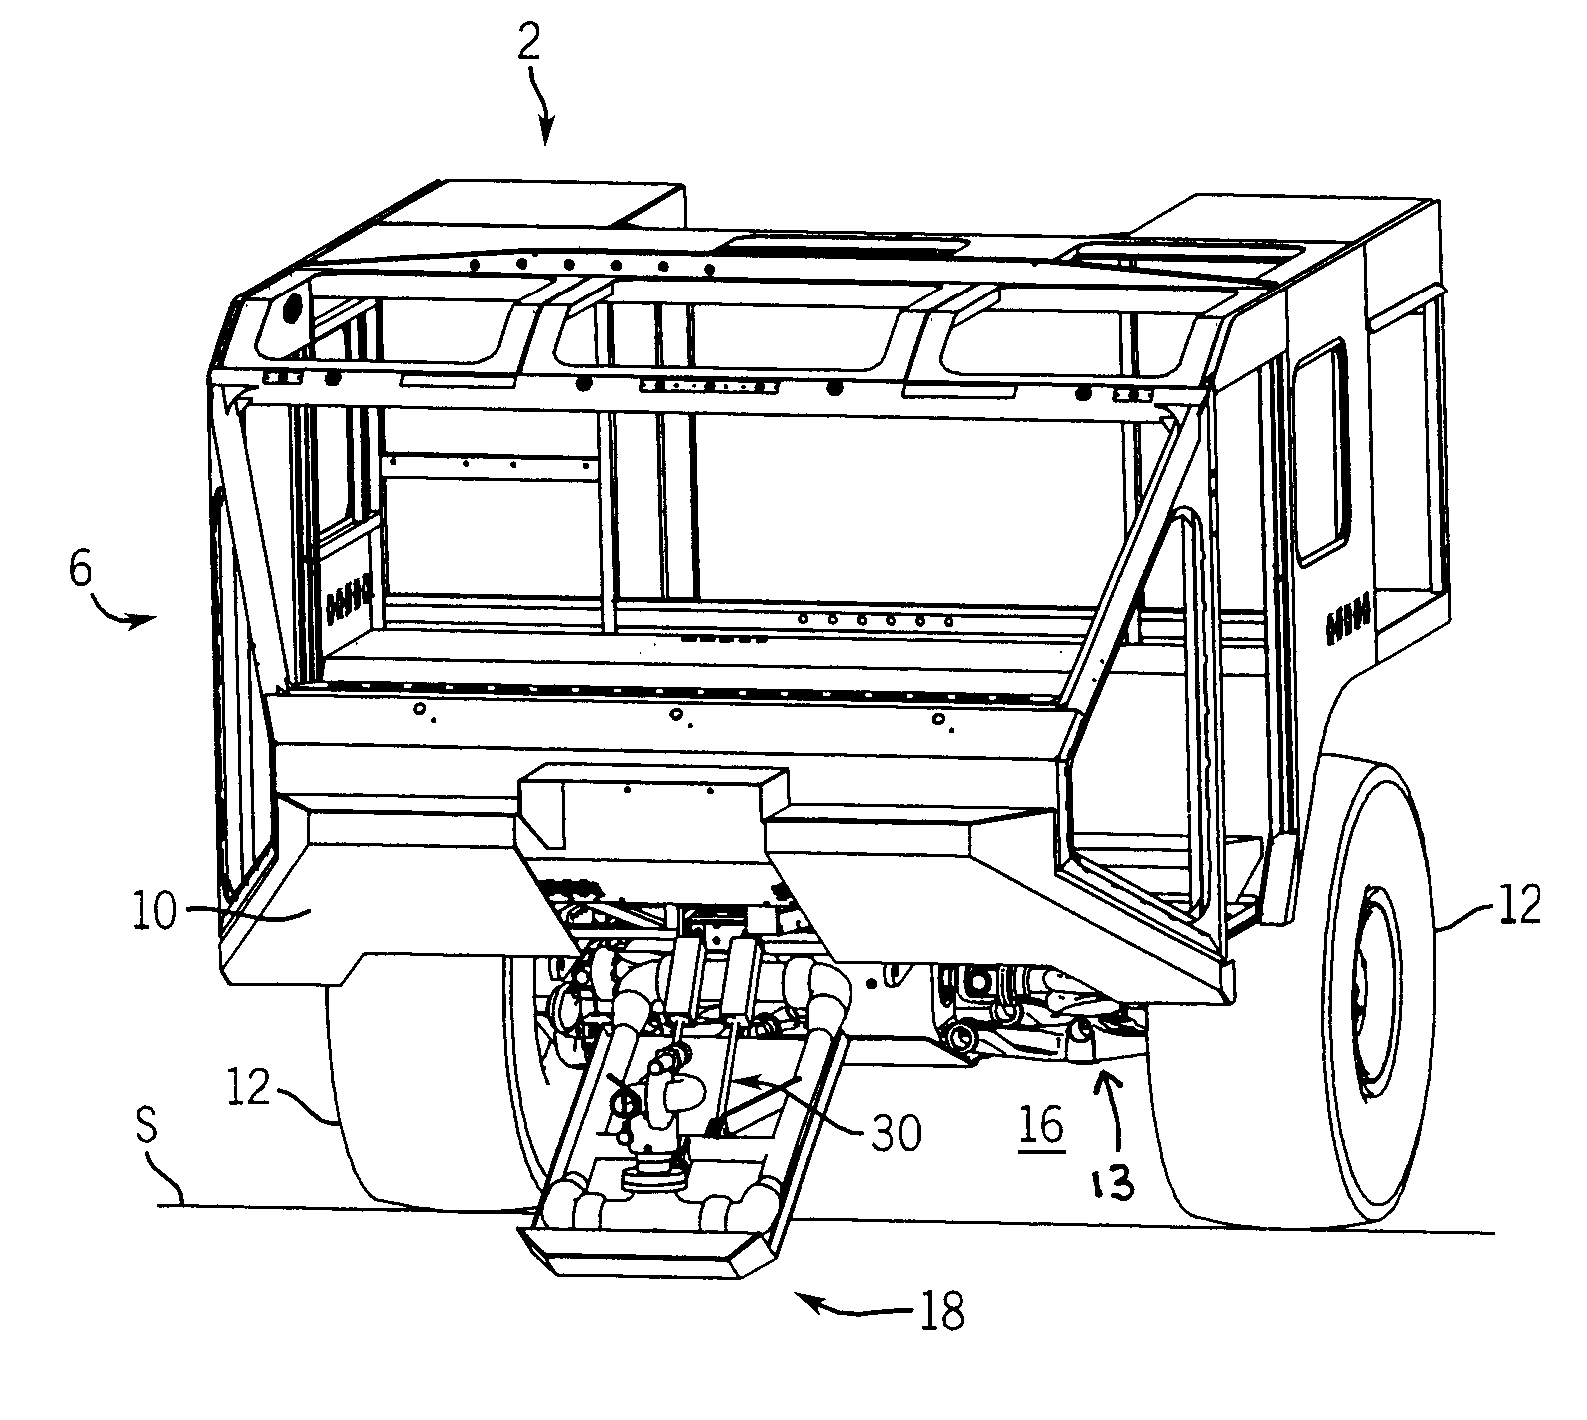 Fluid dispensing arrangement and skid pan for a vehicle